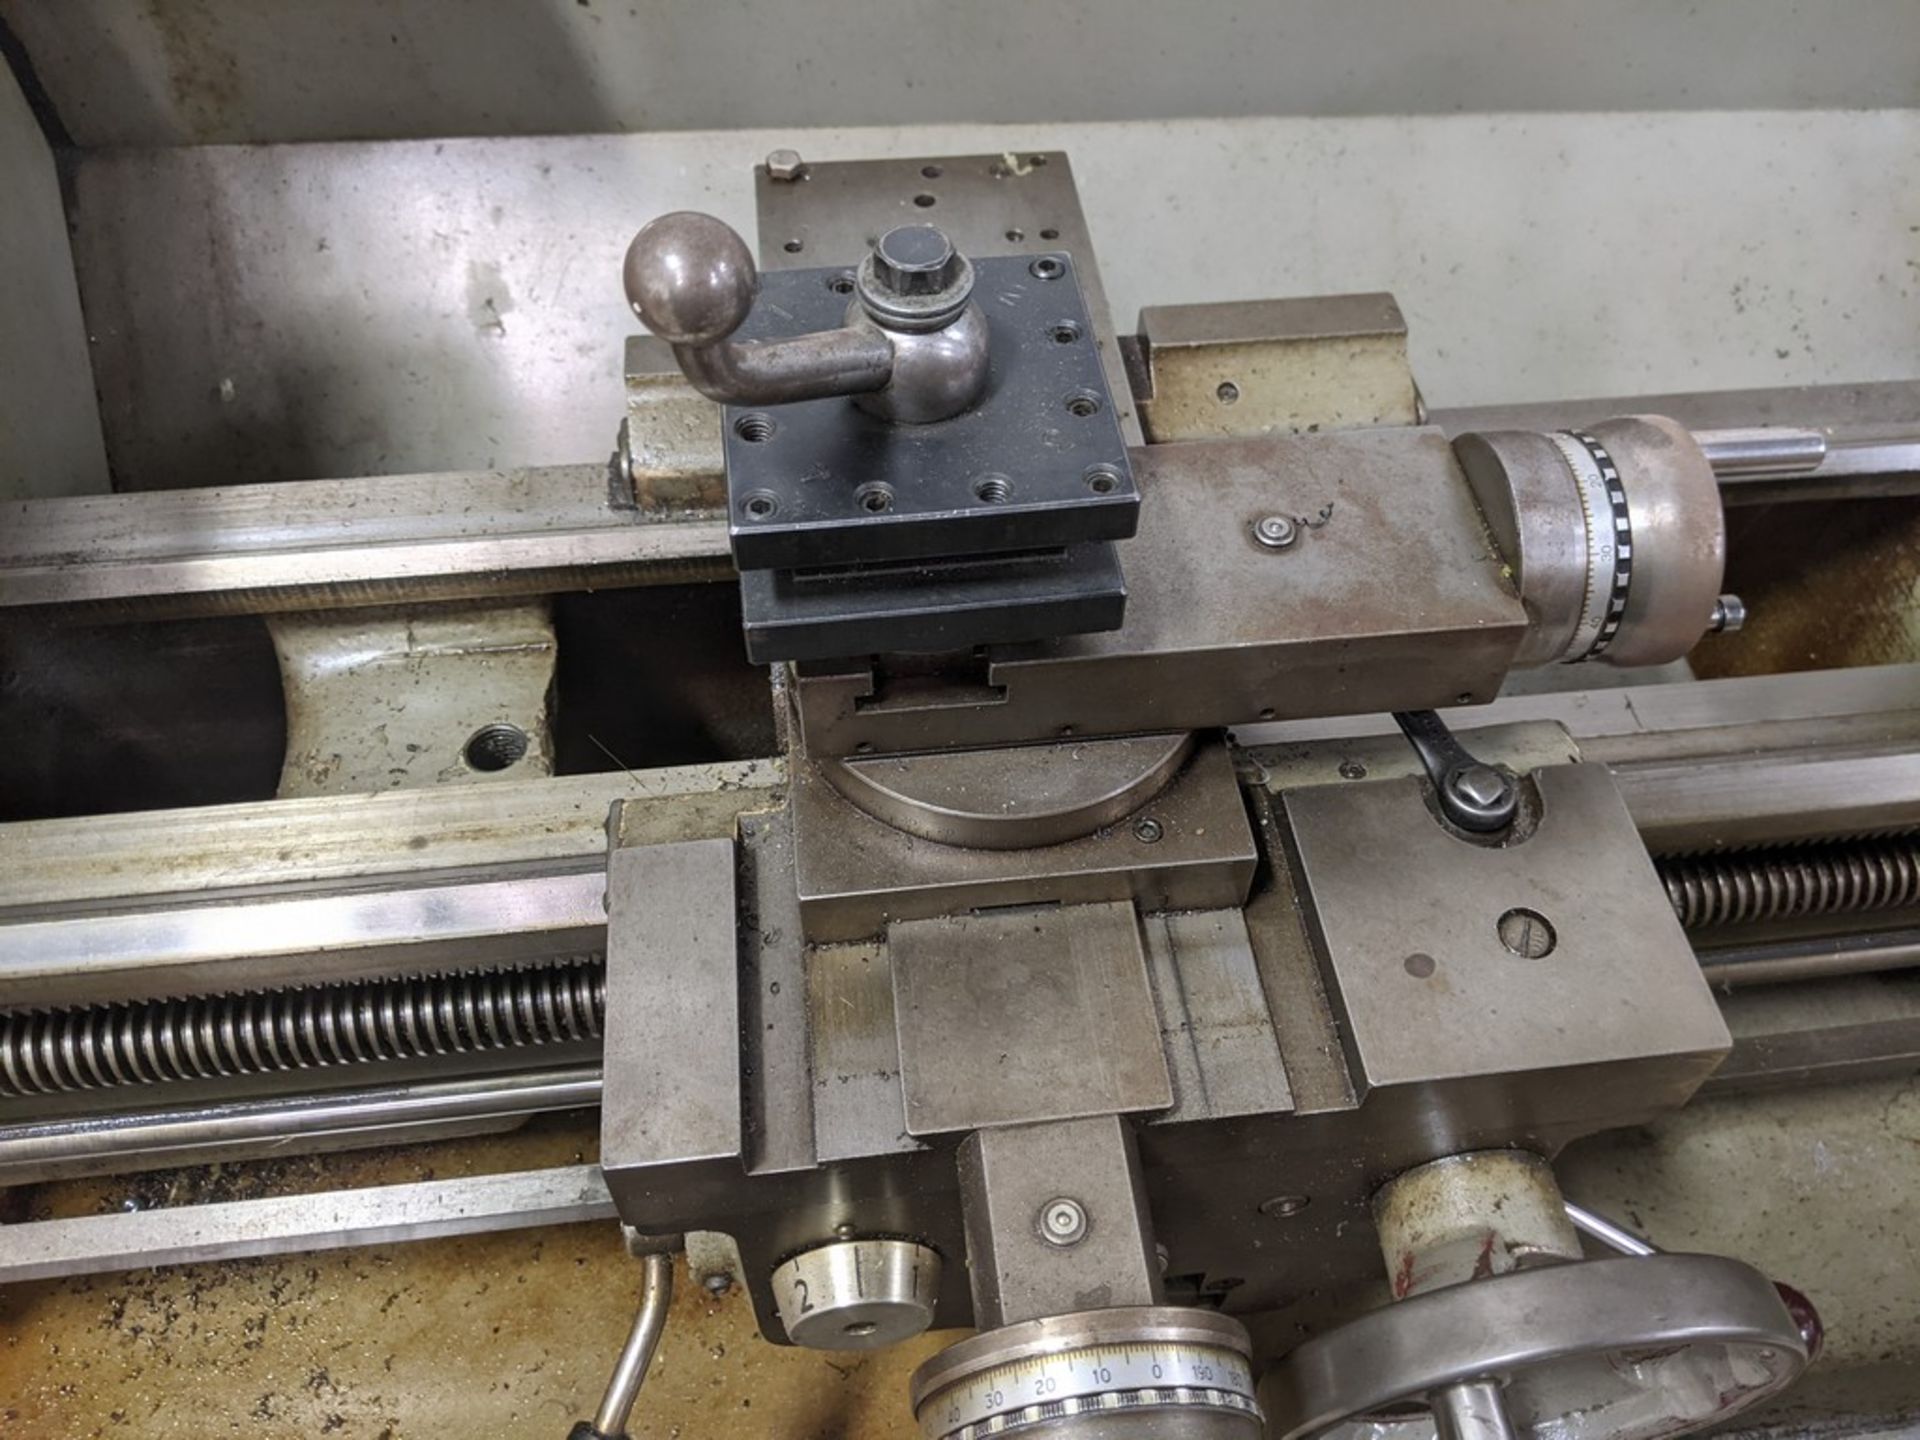 CLAUSING COLCHESTER 11”X40” TOOL ROOM LATHE, S/N 2/0021/01702, 2000 RPM SPINDLE, 6” 6 JAW CHUCK, - Image 6 of 8